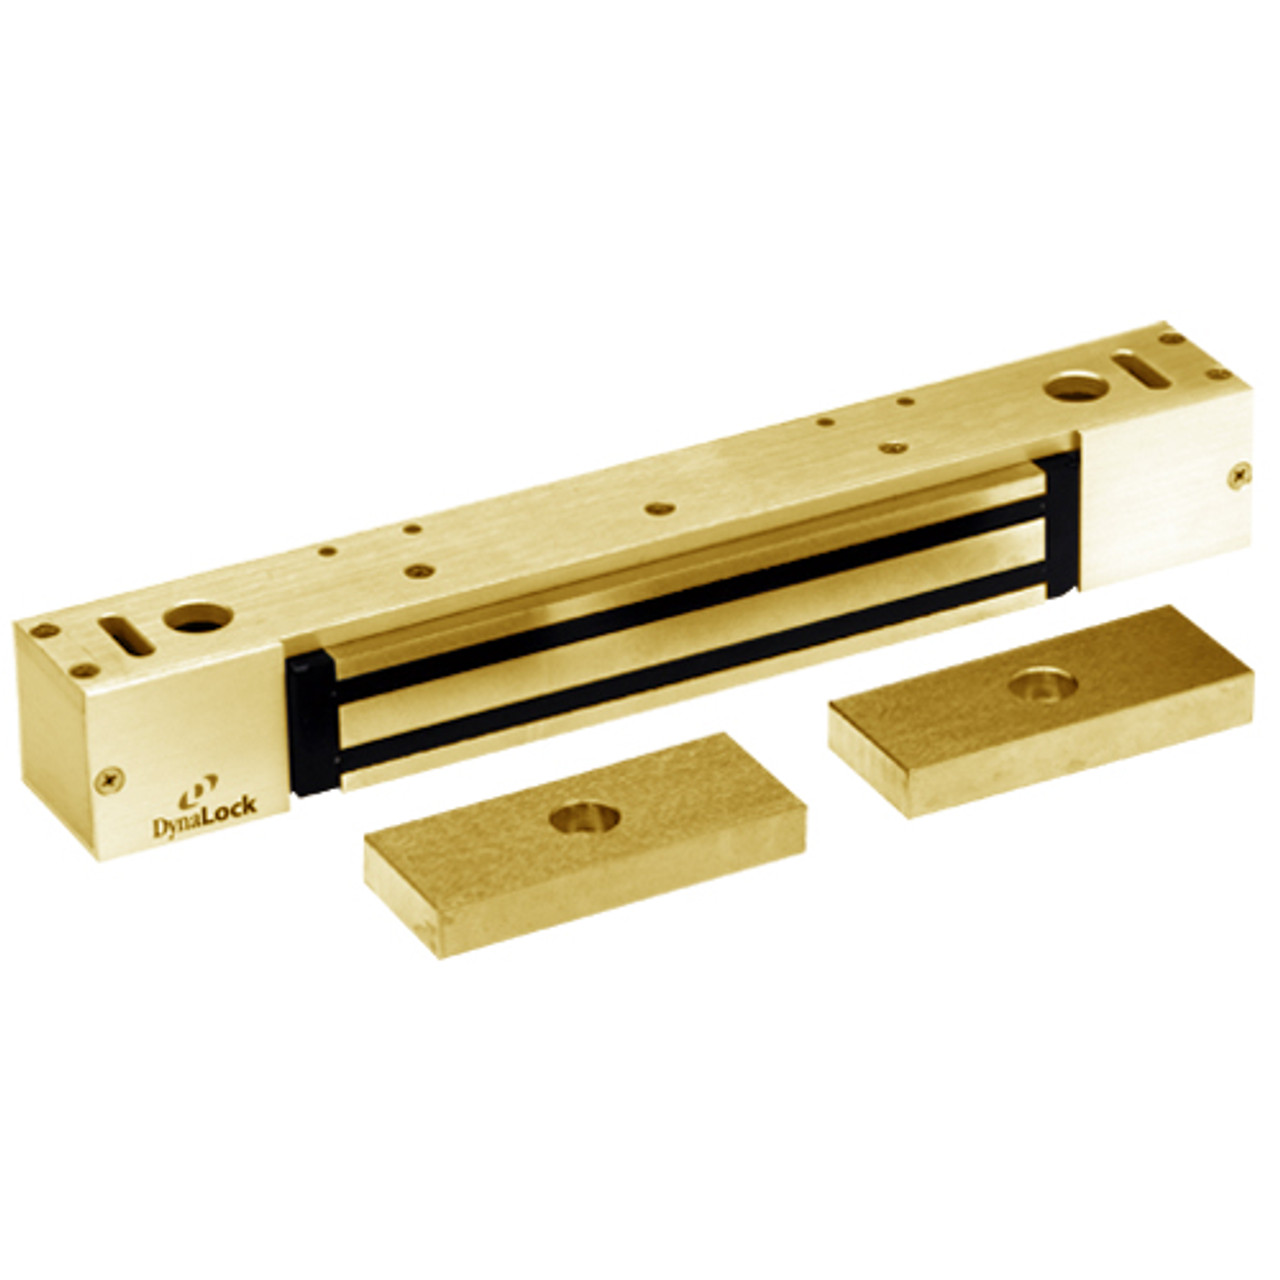 2268-15-US3-ATS DynaLock 2268 Series Single Classic Low Profile Electromagnetic Lock for Pair Outswing Door with ATS in Bright Brass